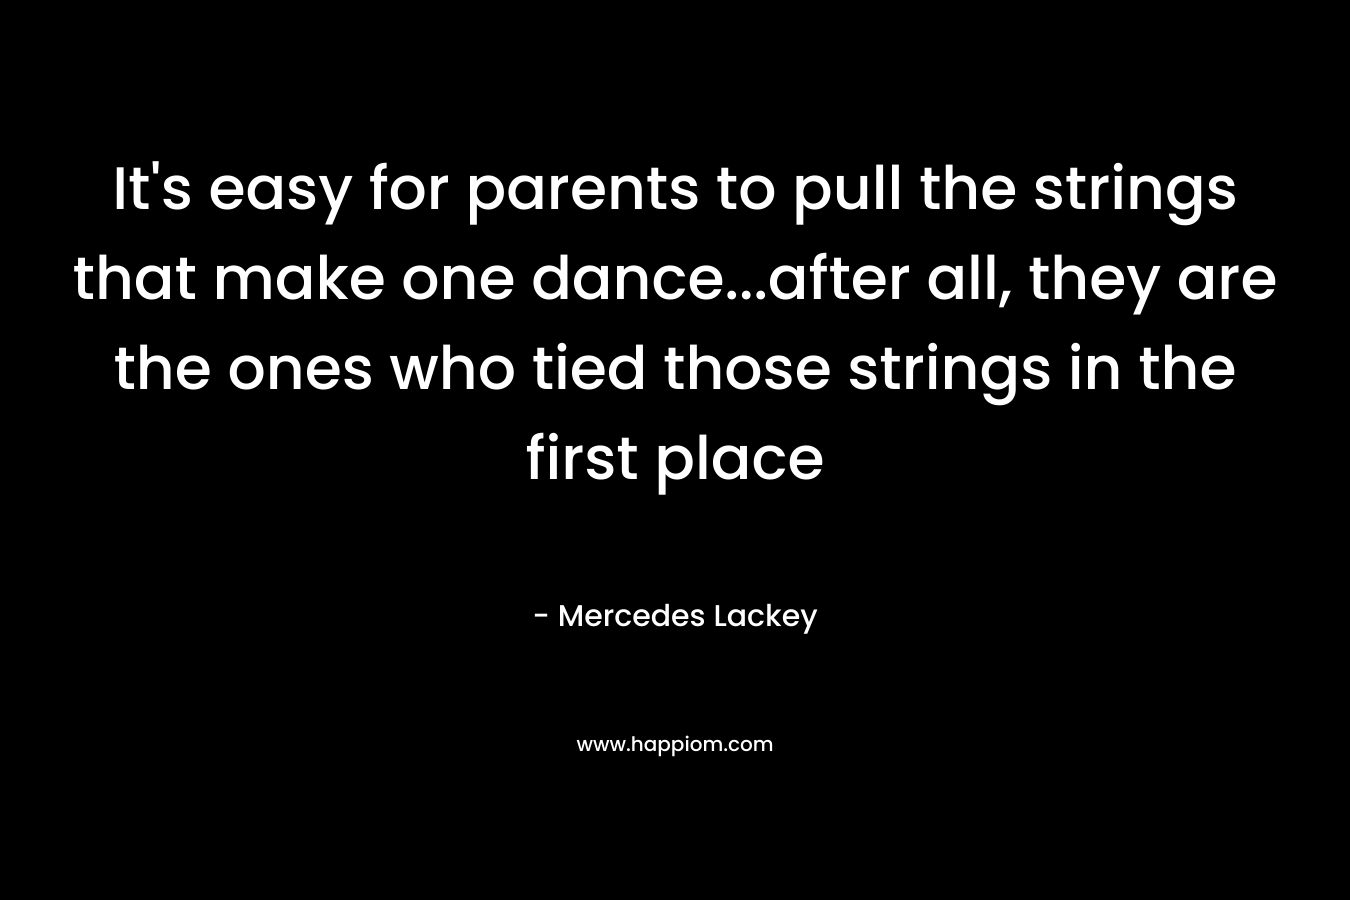 It’s easy for parents to pull the strings that make one dance…after all, they are the ones who tied those strings in the first place – Mercedes Lackey